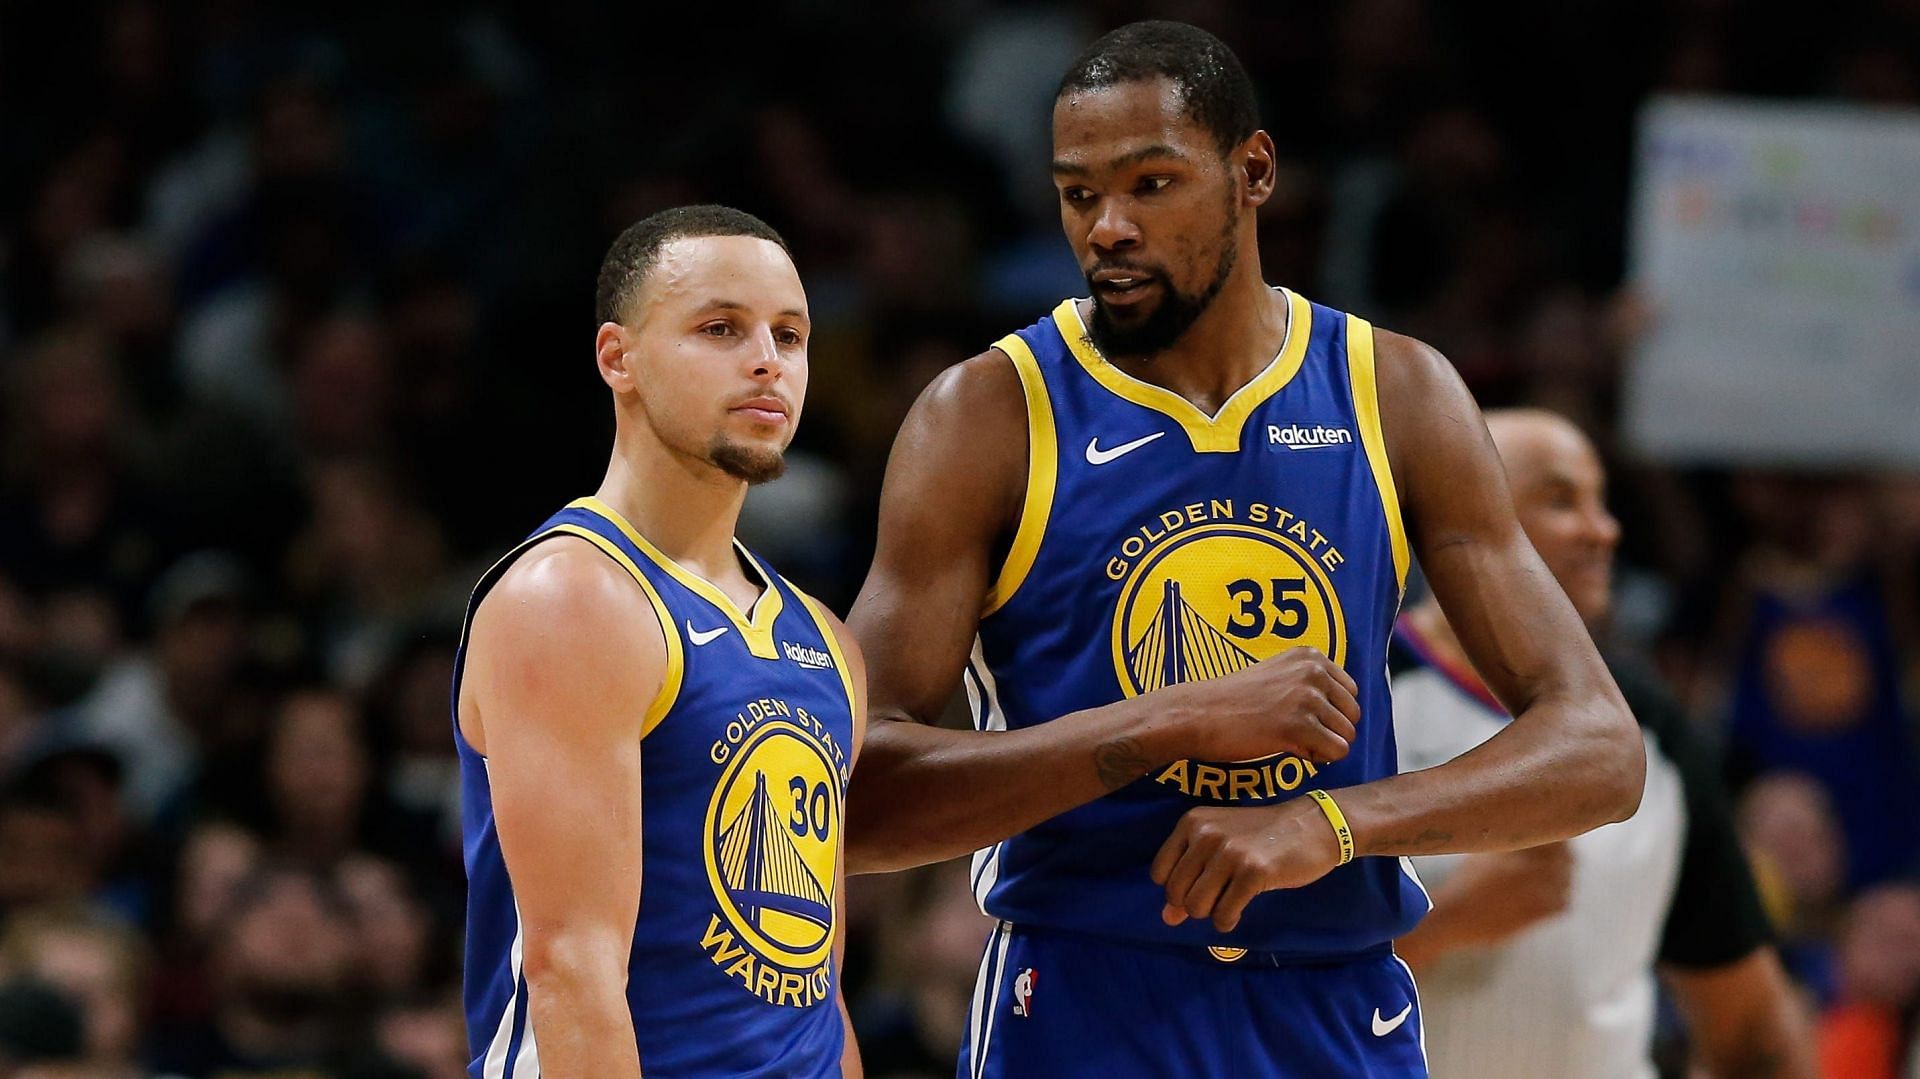 Kevin Durant is not walking through the NBA Finals door to help Steph Curry and the Golden State Warriors. [Photo: USA Today]